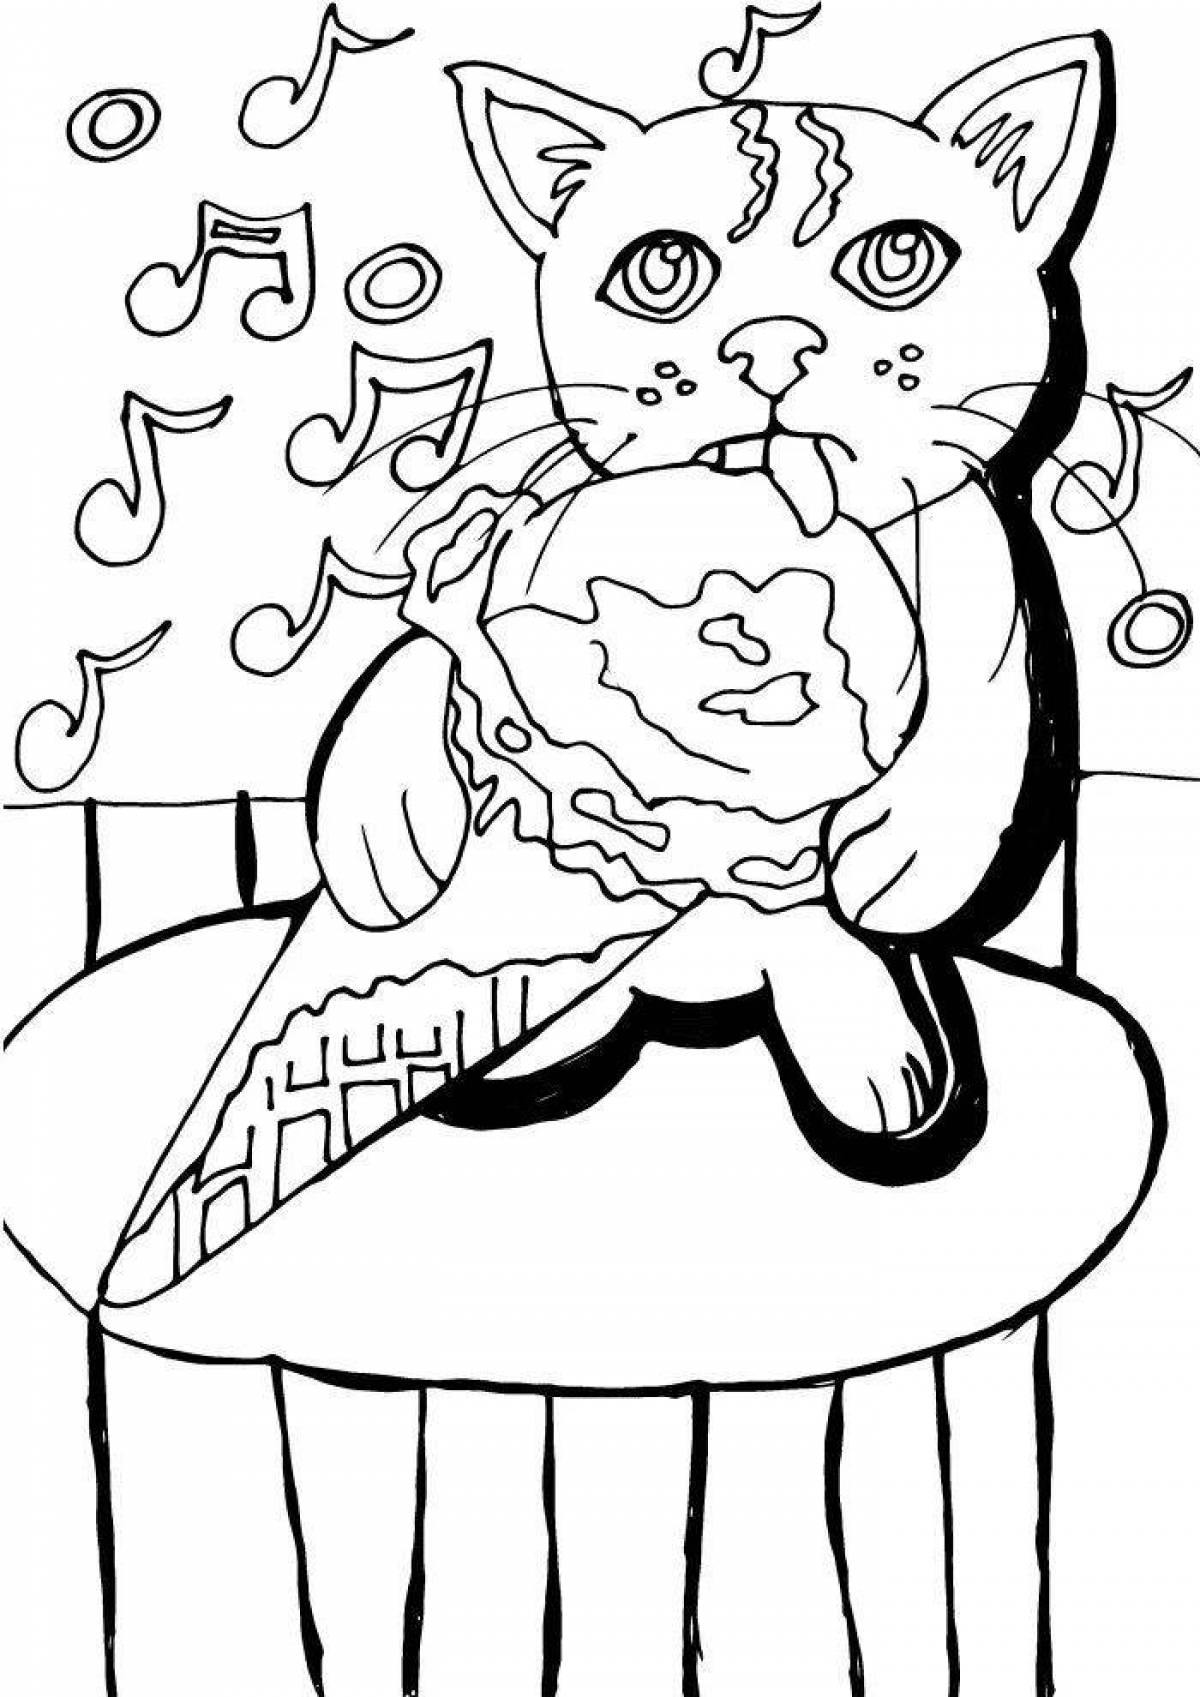 Naughty candy cat coloring page